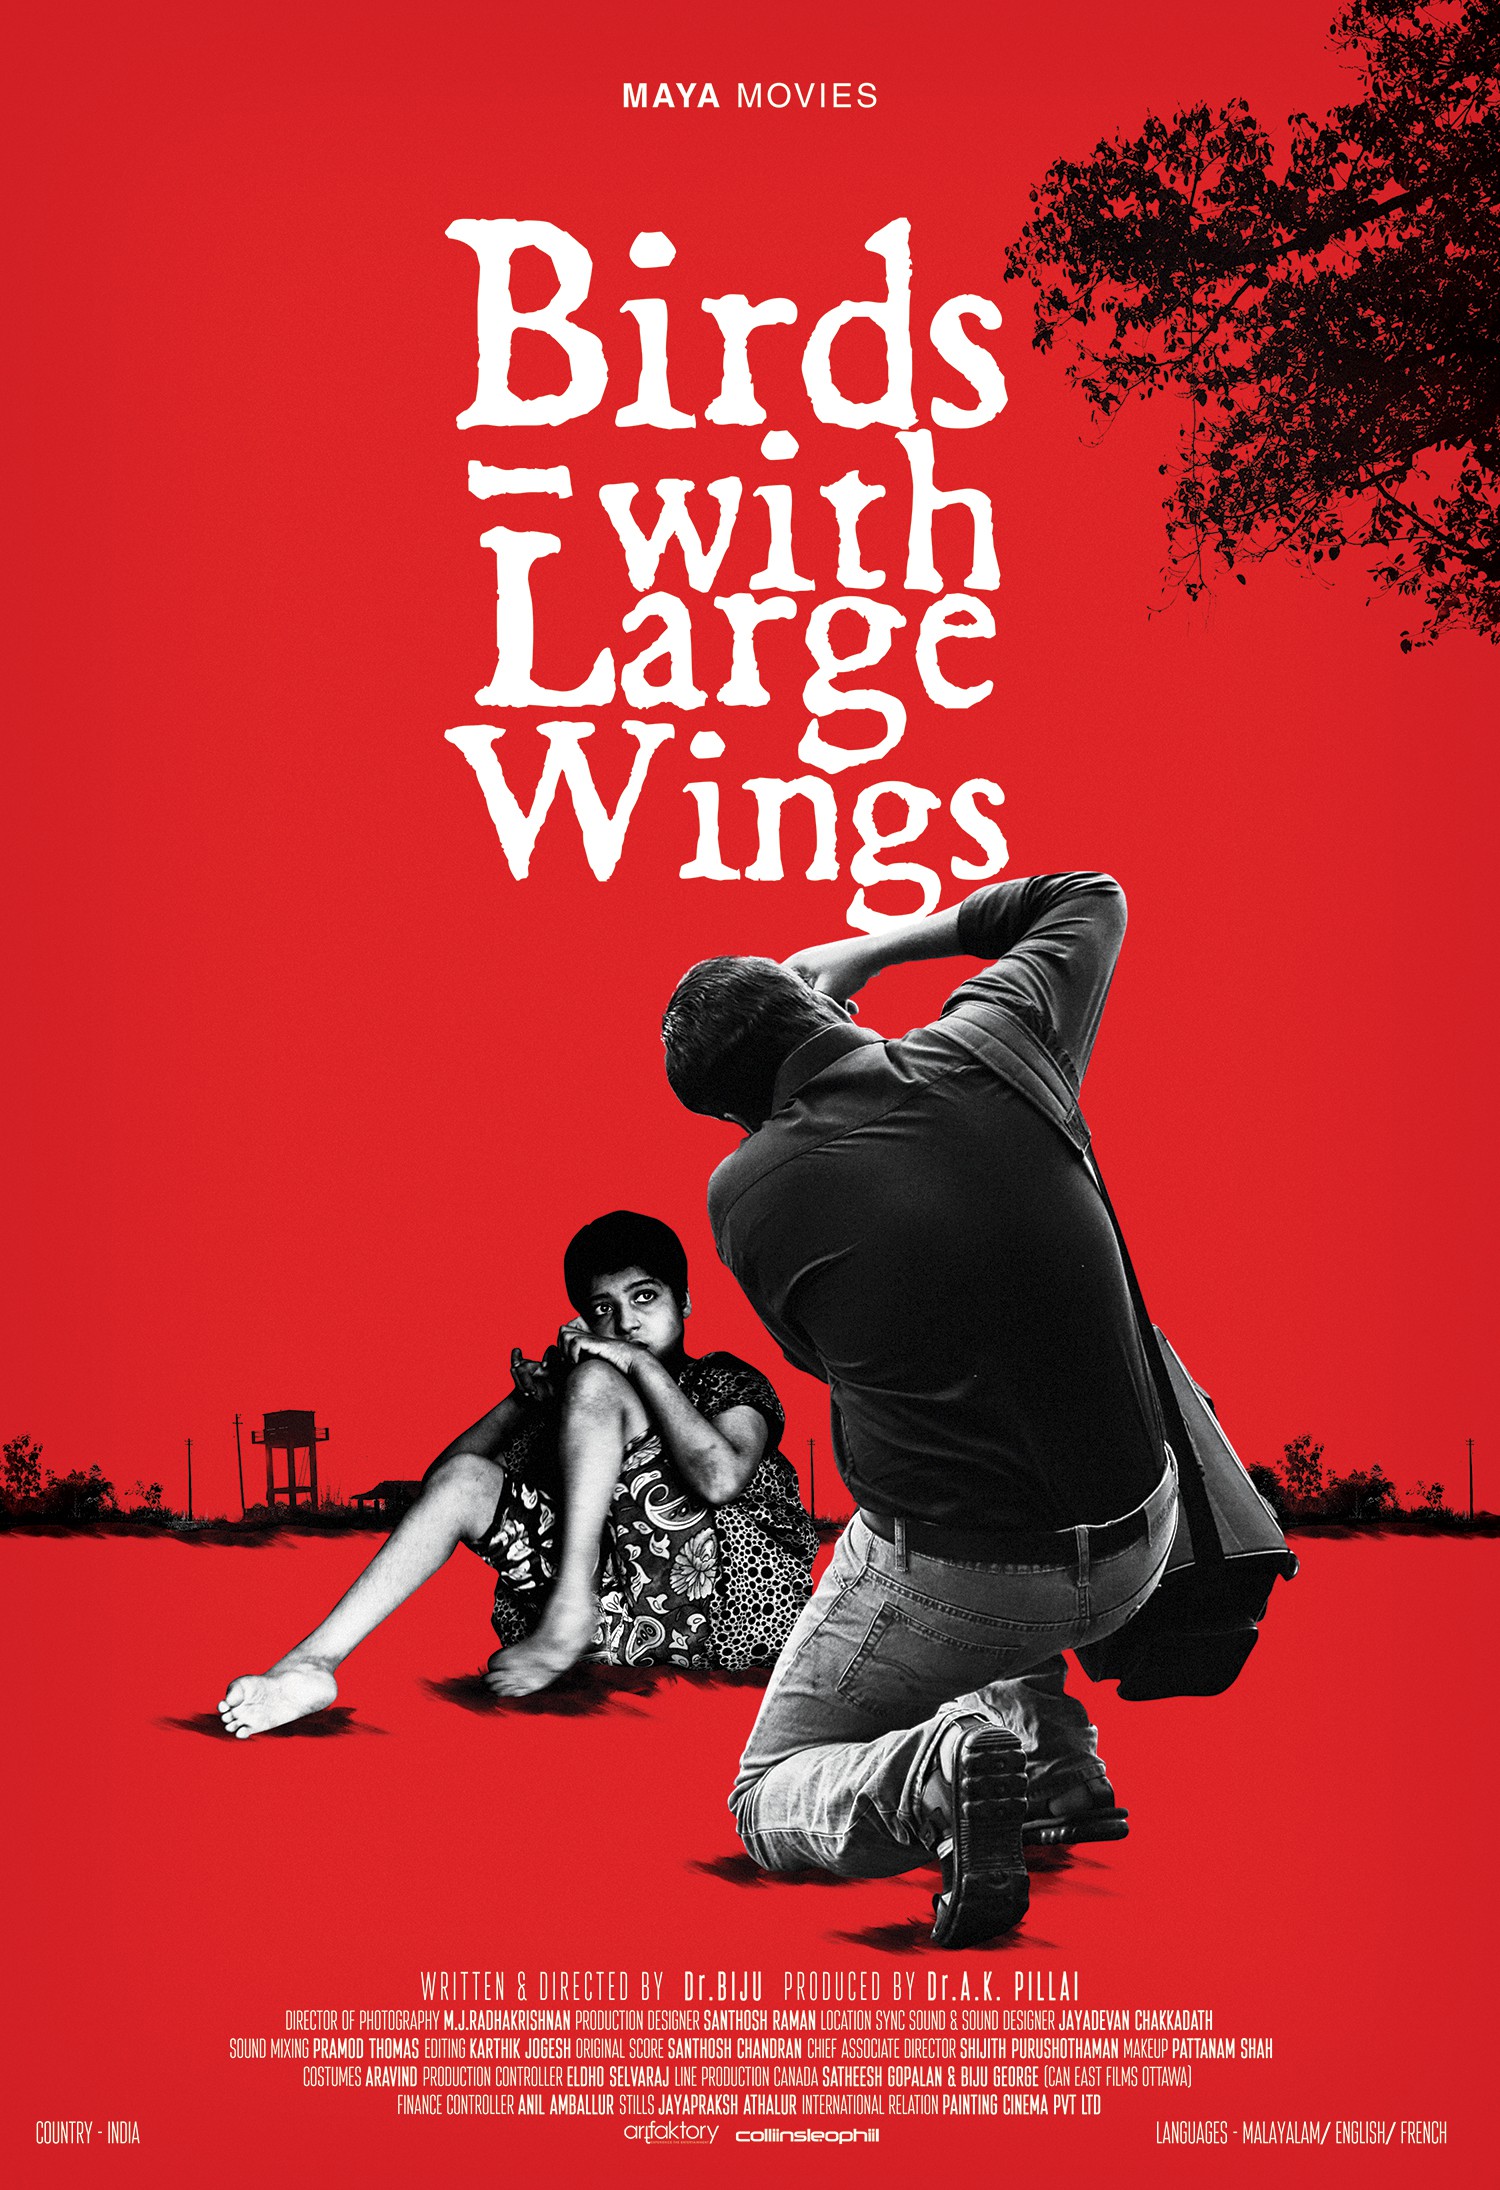 Mega Sized Movie Poster Image for Birds with Large Wings (#2 of 2)